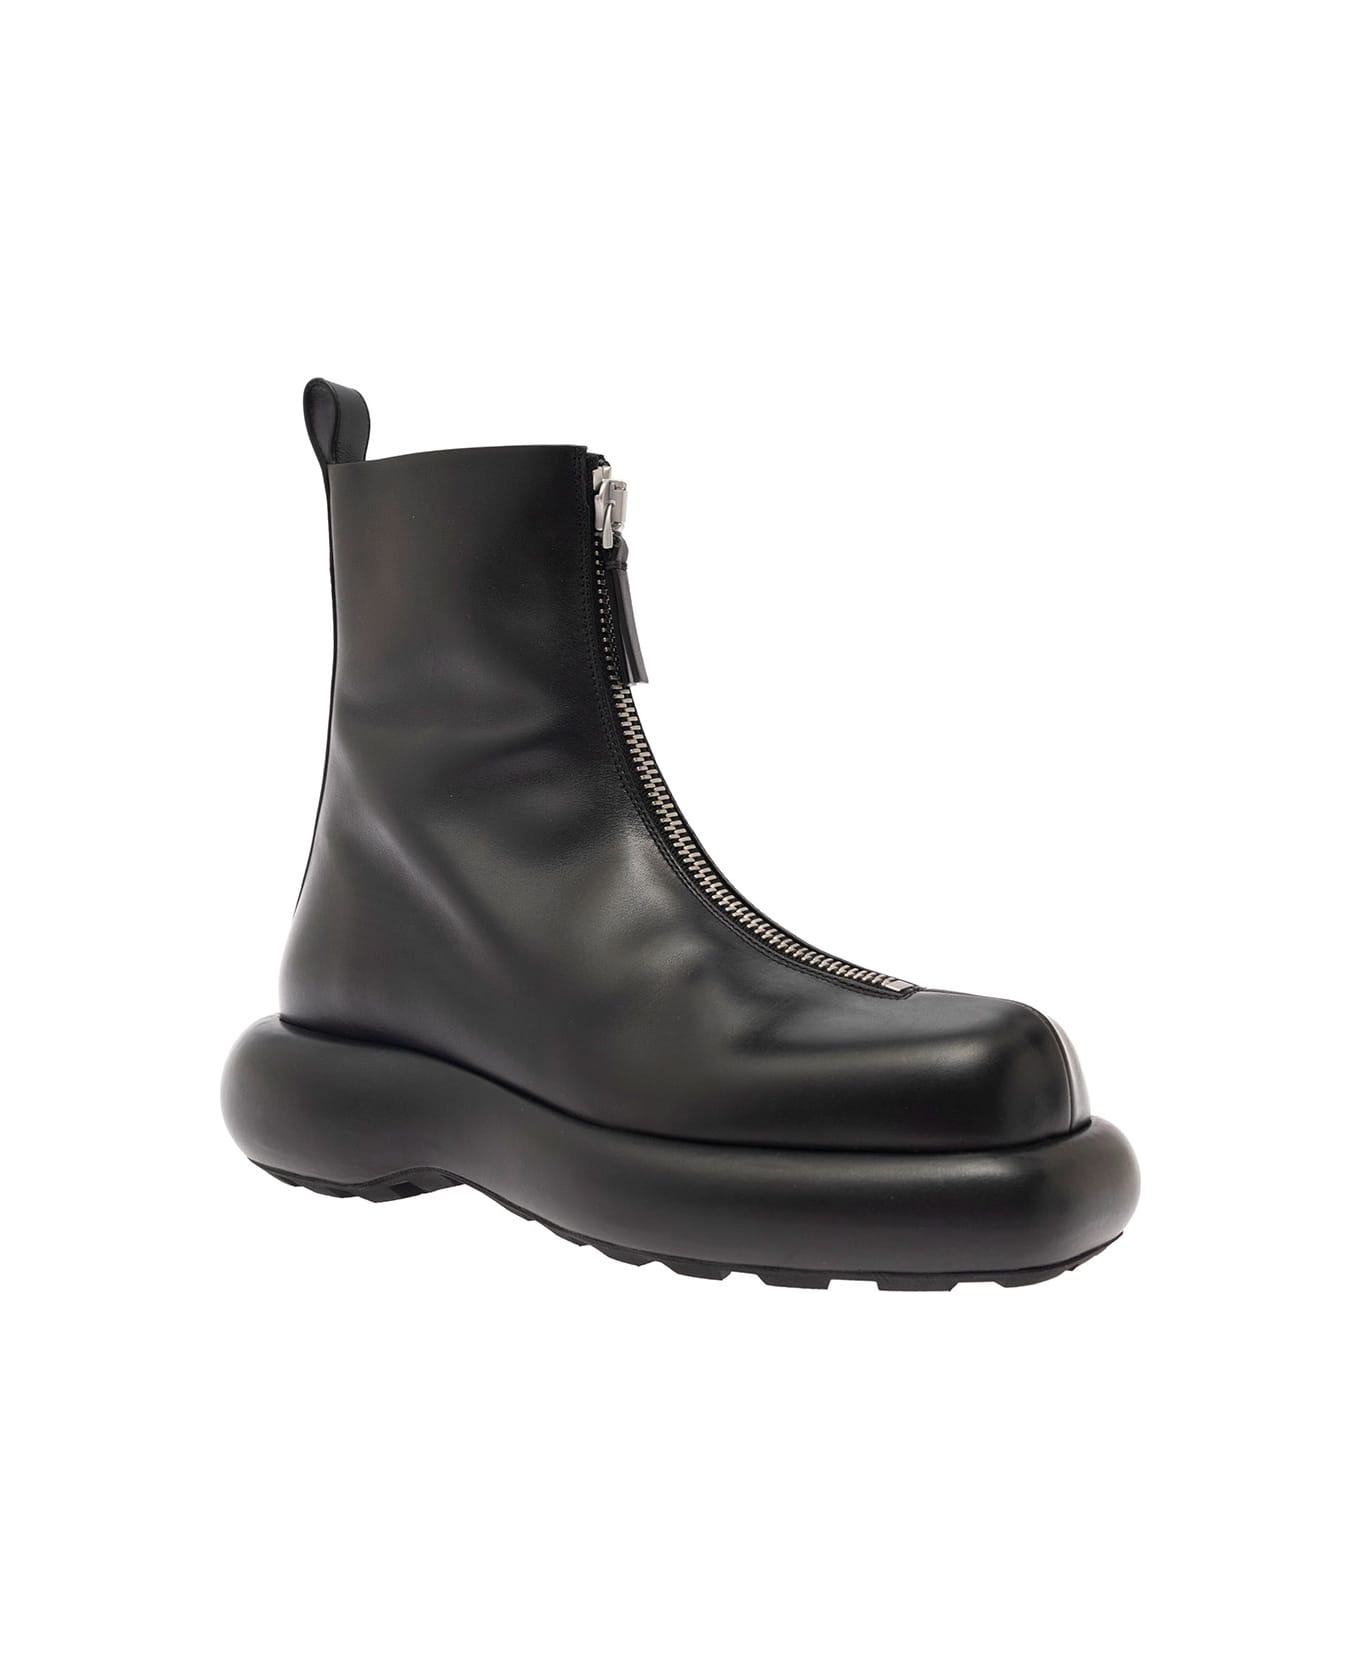 Jil Sander Strong Form Semi-shiny Calf Leather Trunk Ankle Boot - Black